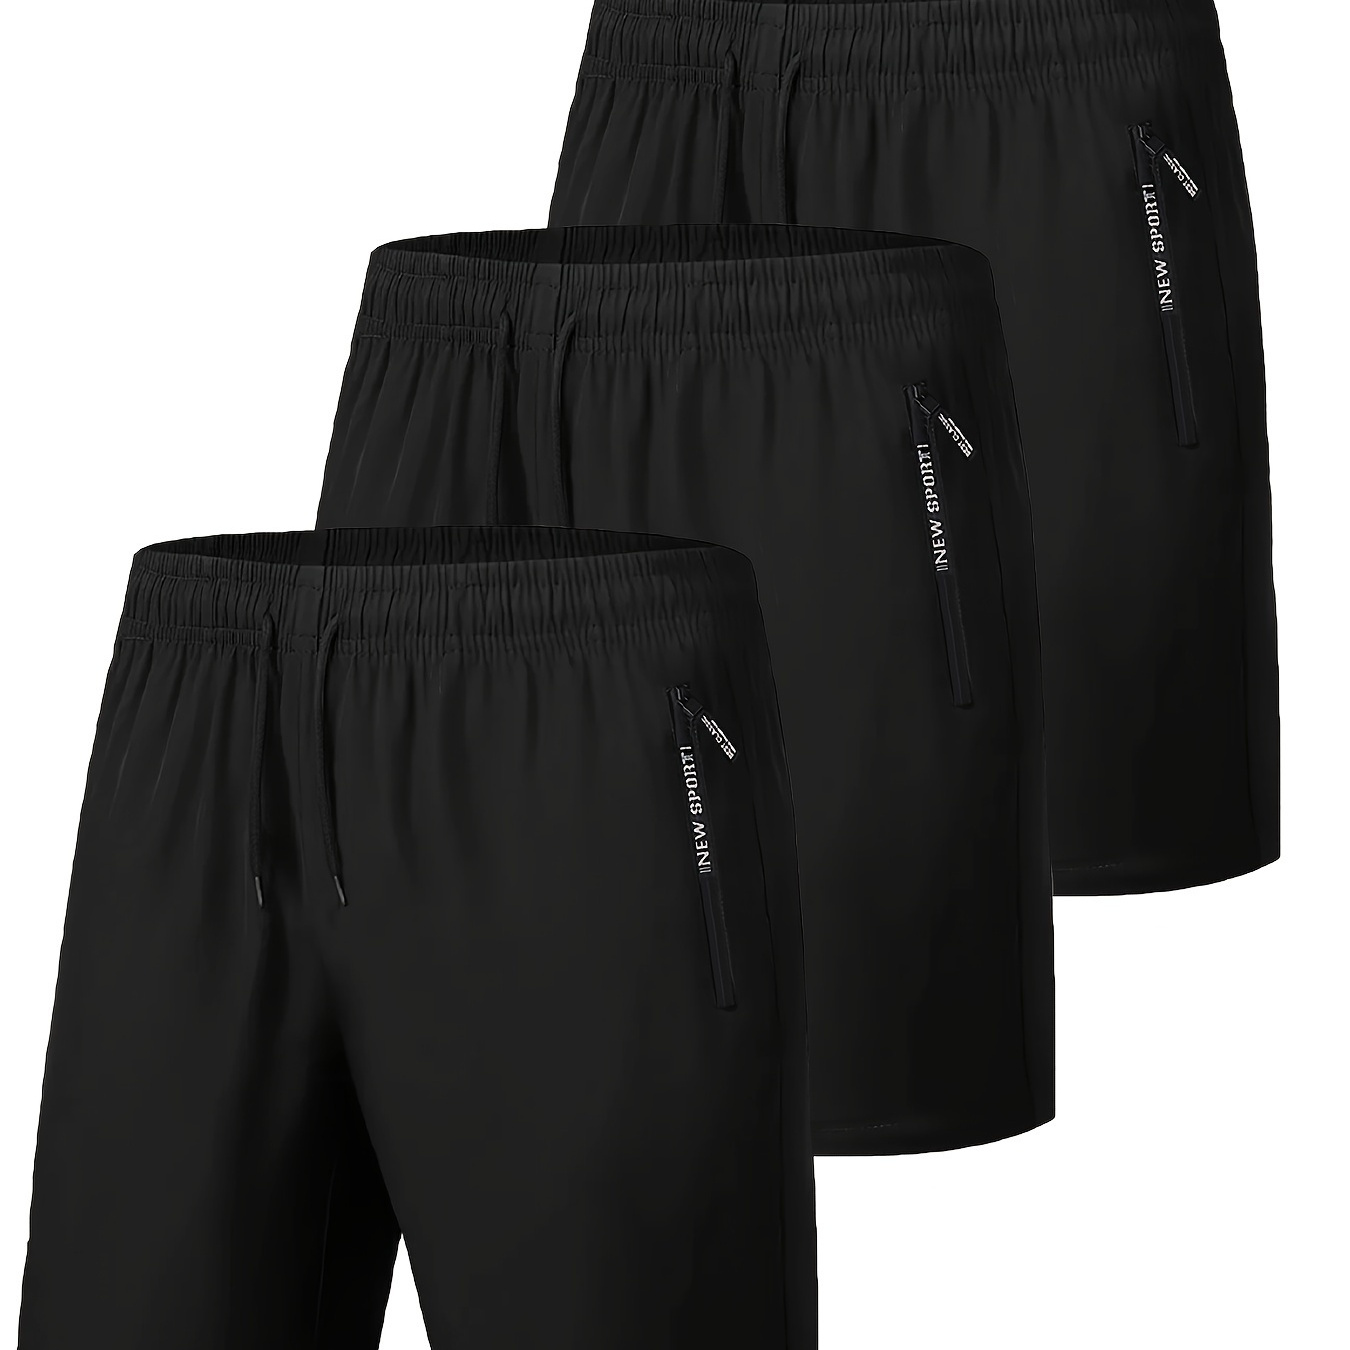 

3-pack Men's Workout Shorts With Zipper Pockets, Lightweight Athletic Gym Active Drawstring Shorts For Summer Sports